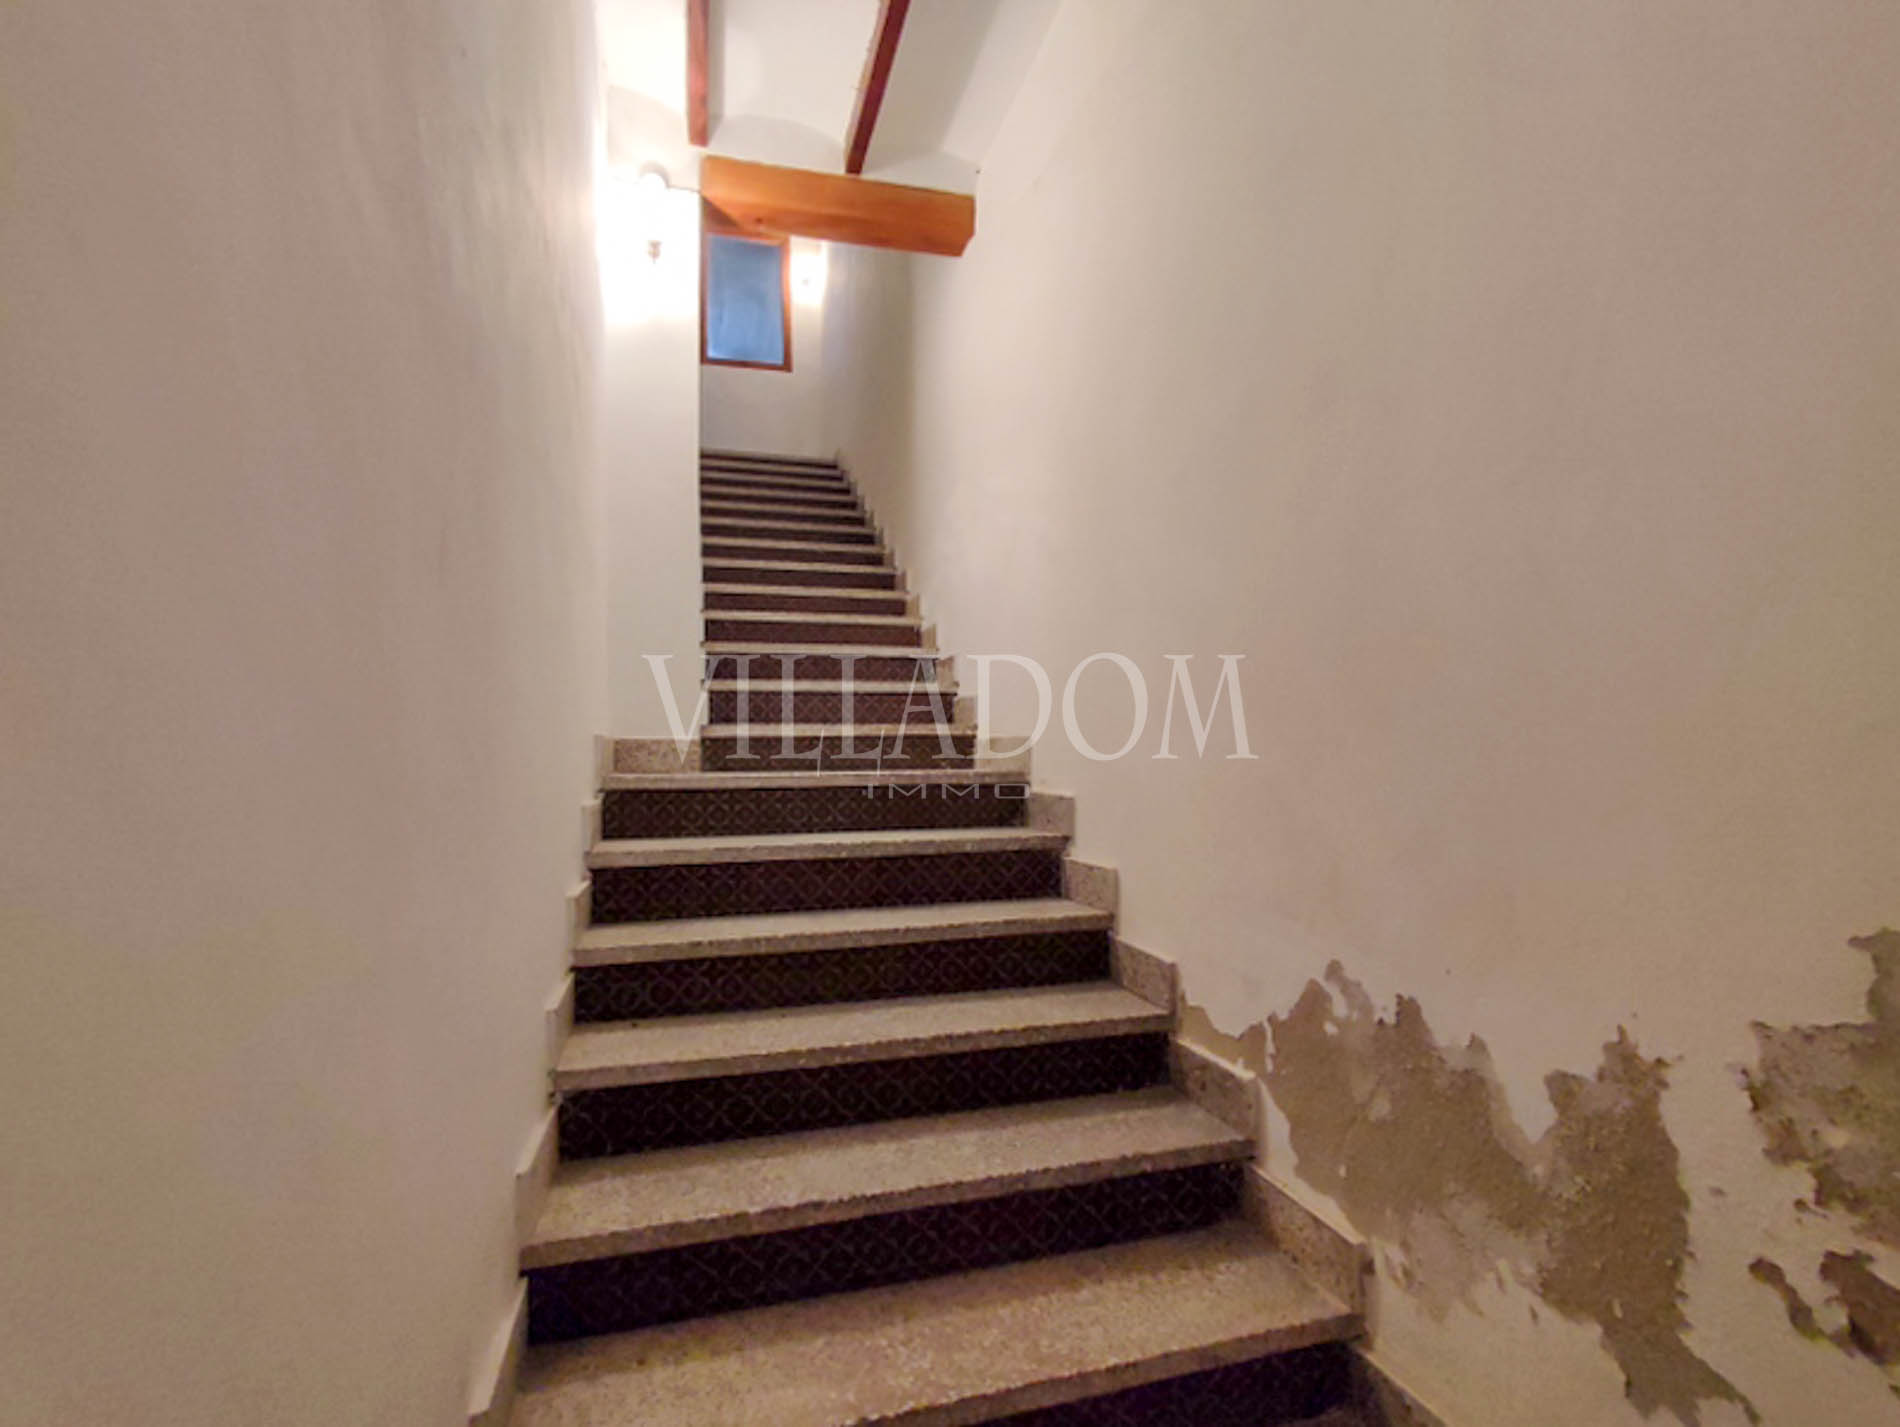 Townhouse in the heart of the historic centre of Jávea